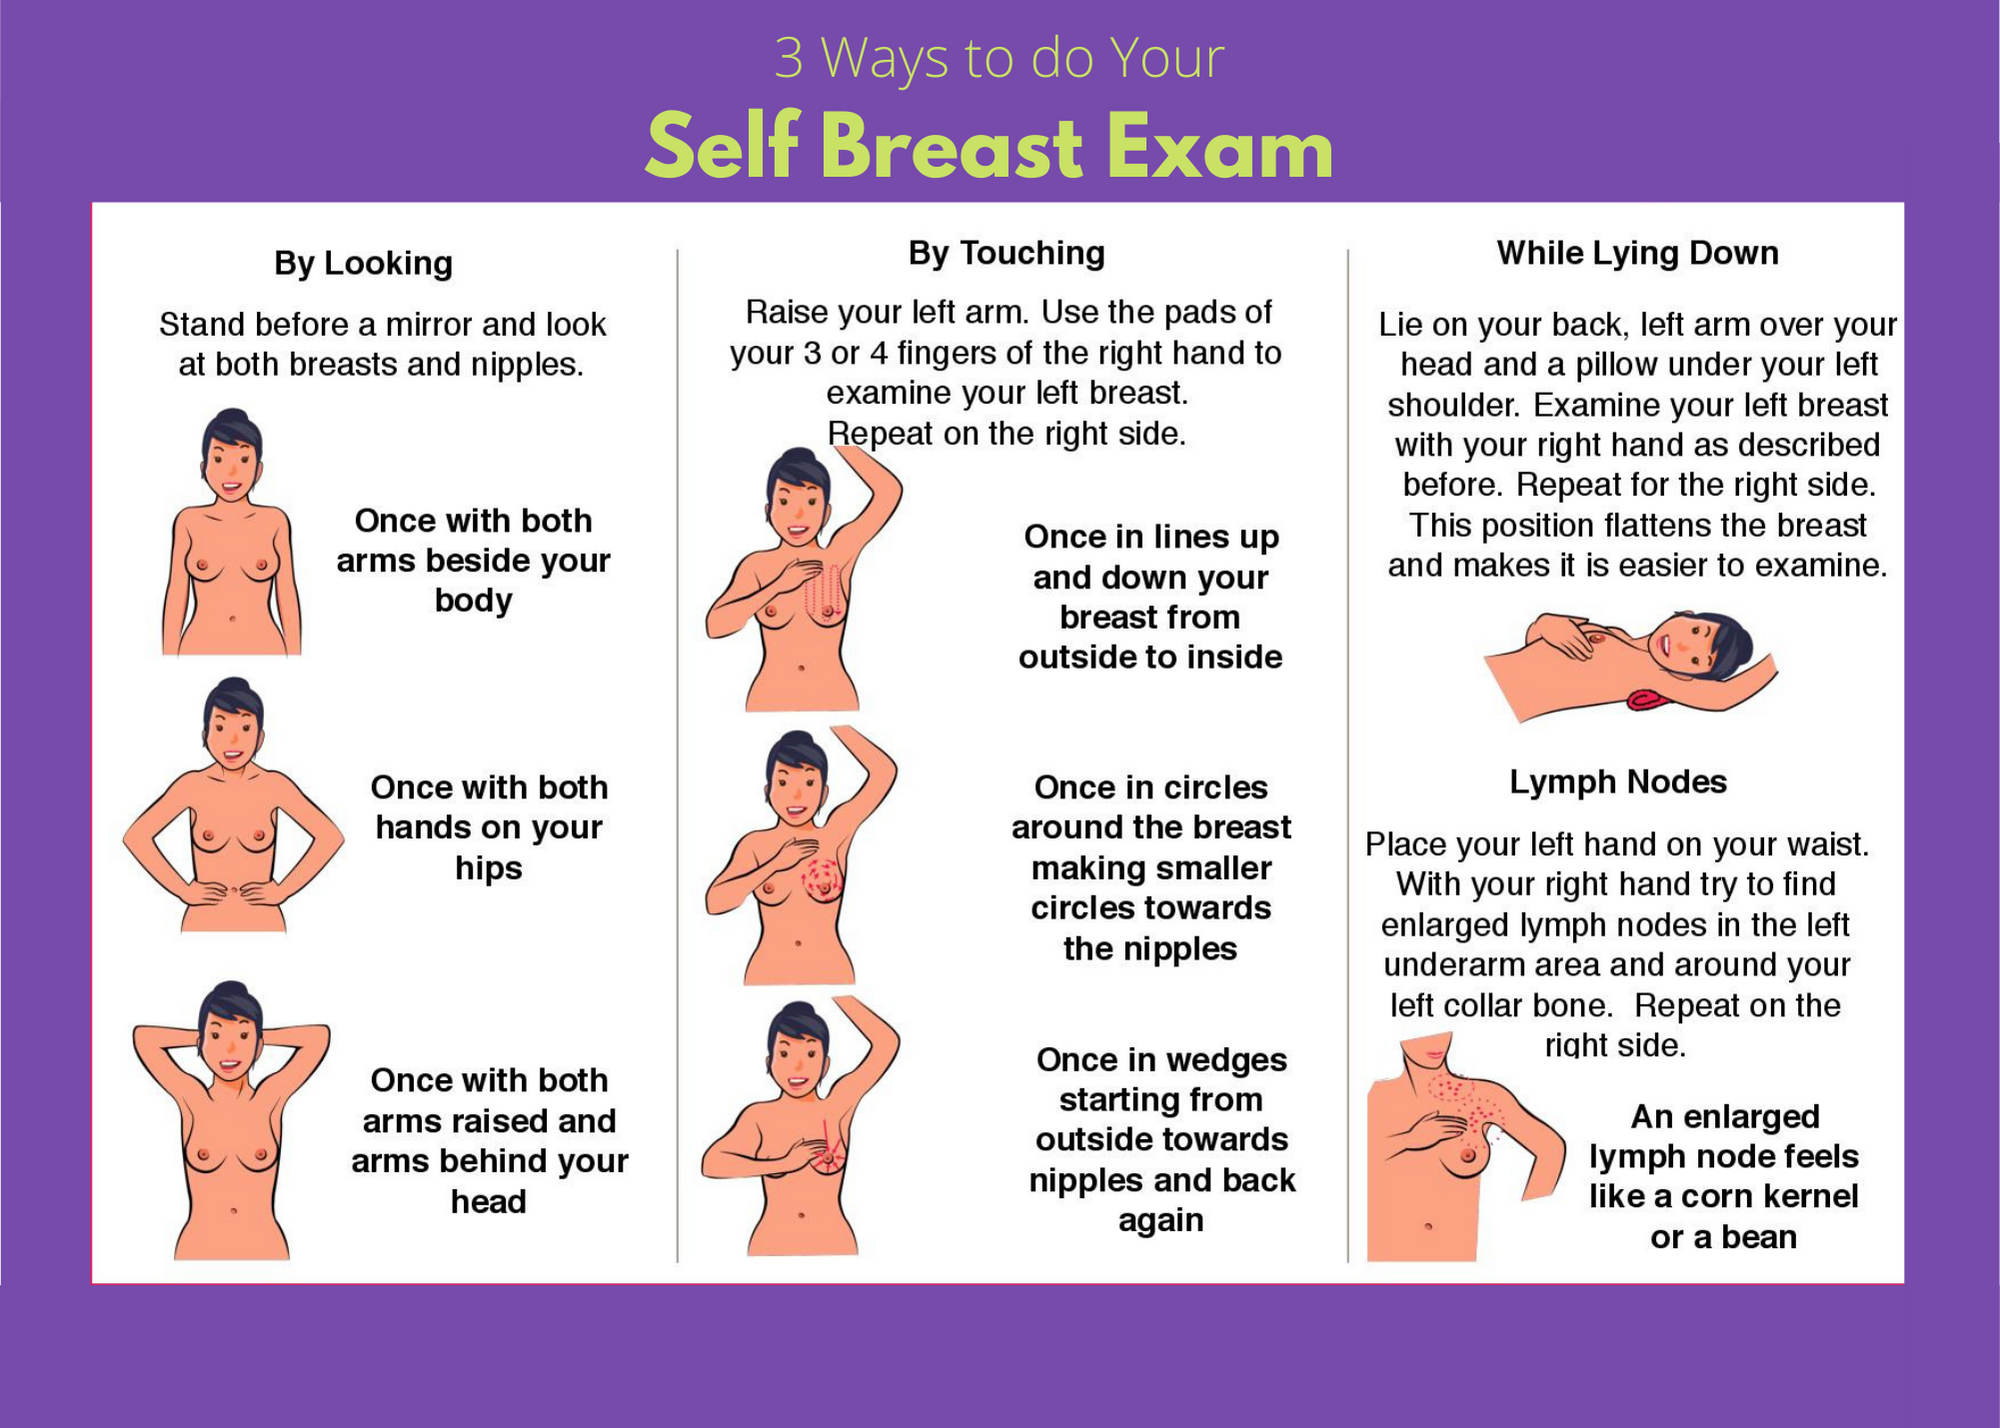 Want Breast Self-Exam Tips? You'll Have to Watch a Man Get Felt Up